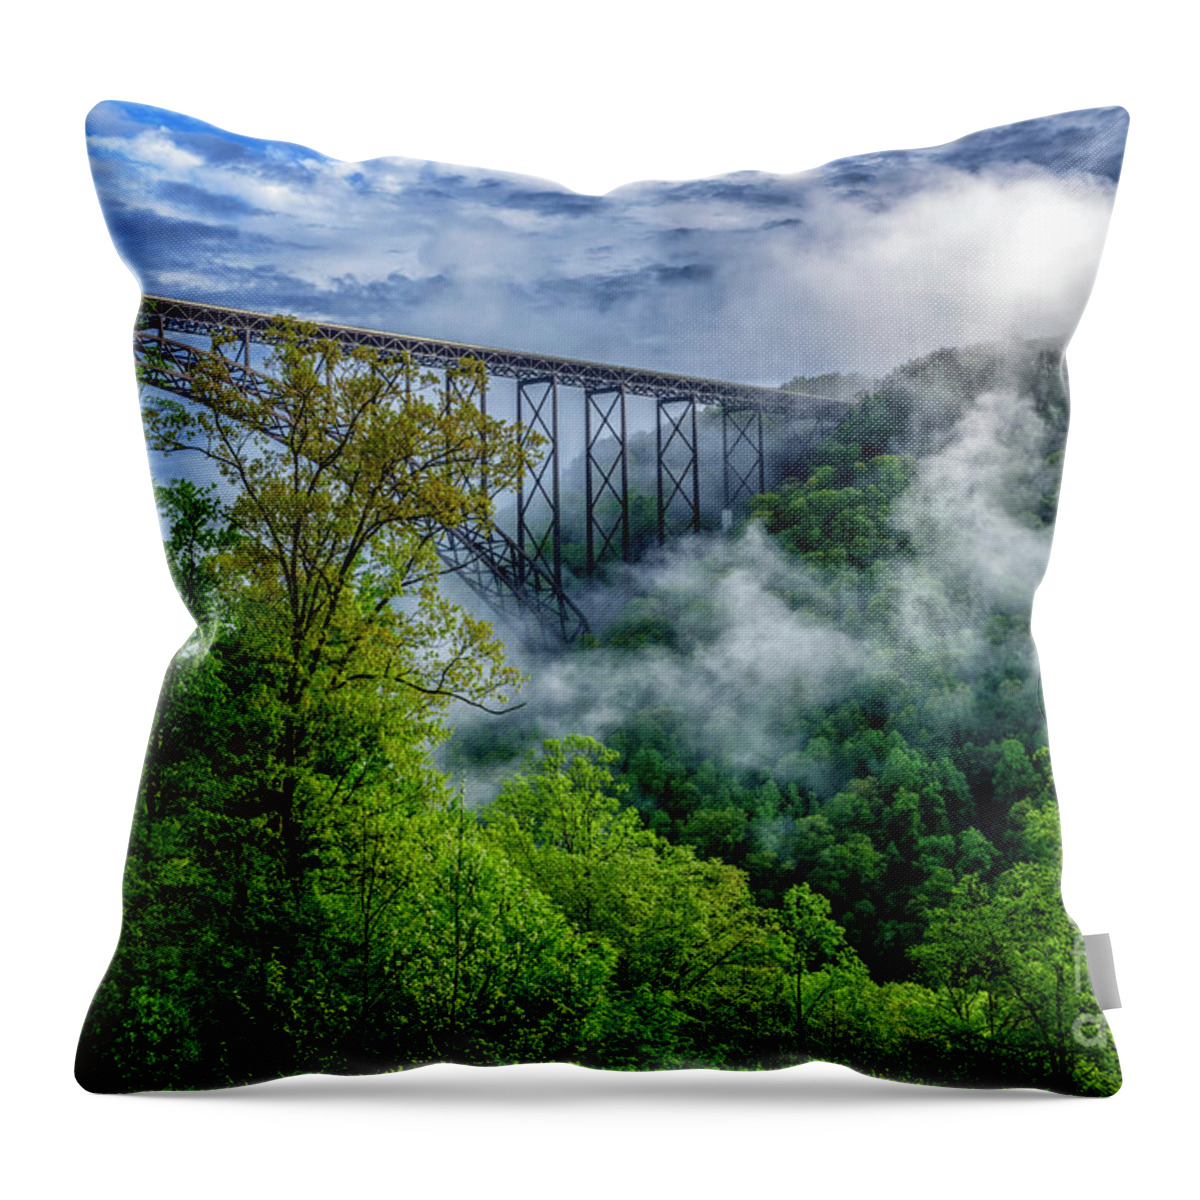 Usa Throw Pillow featuring the photograph New River Gorge Bridge Morning by Thomas R Fletcher